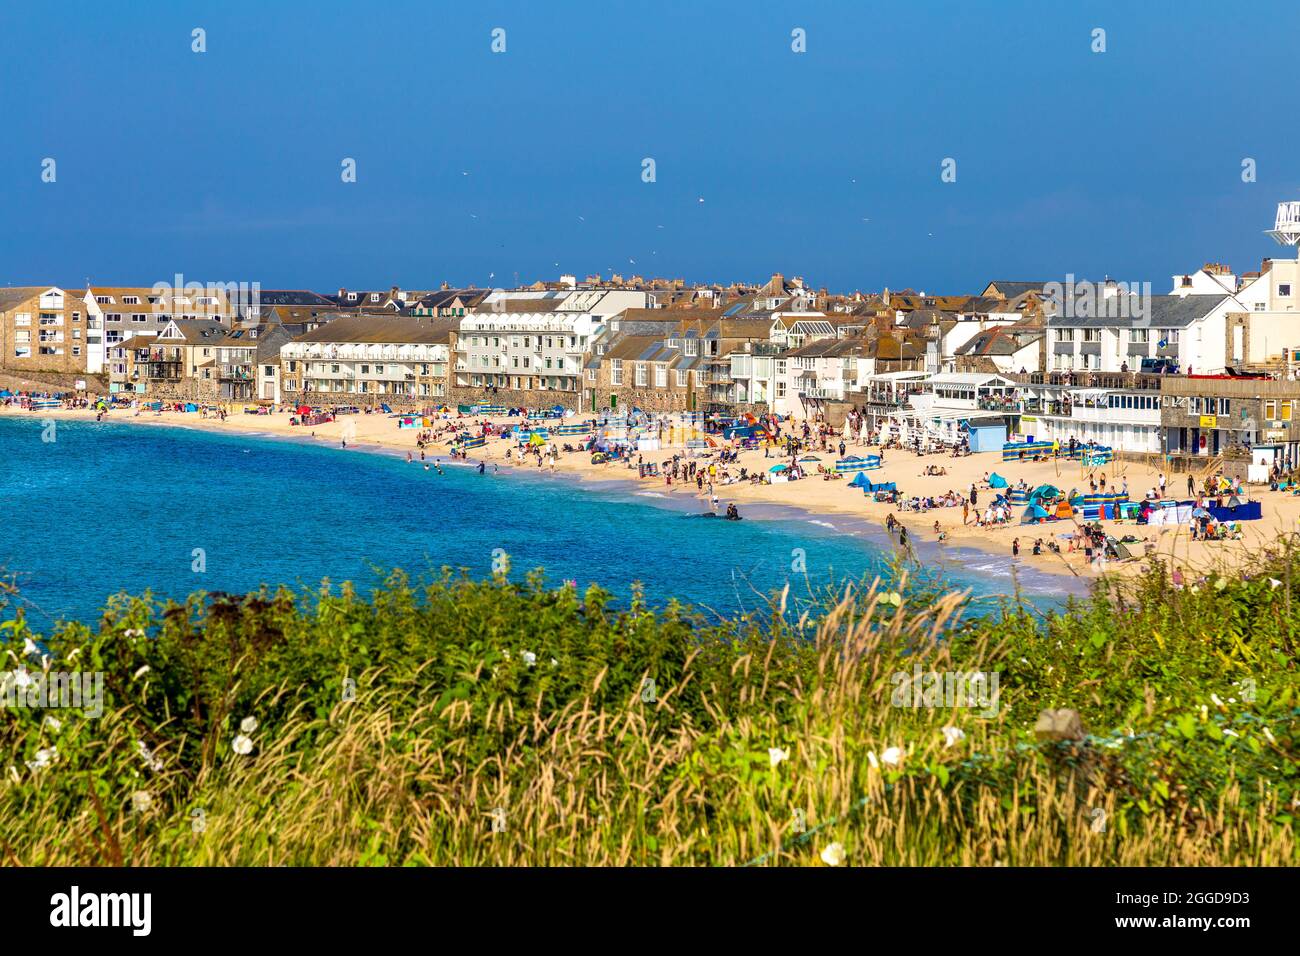 View of Porthmeor Beach on a sunny day in St Ives, Cornwall, UK Stock Photo